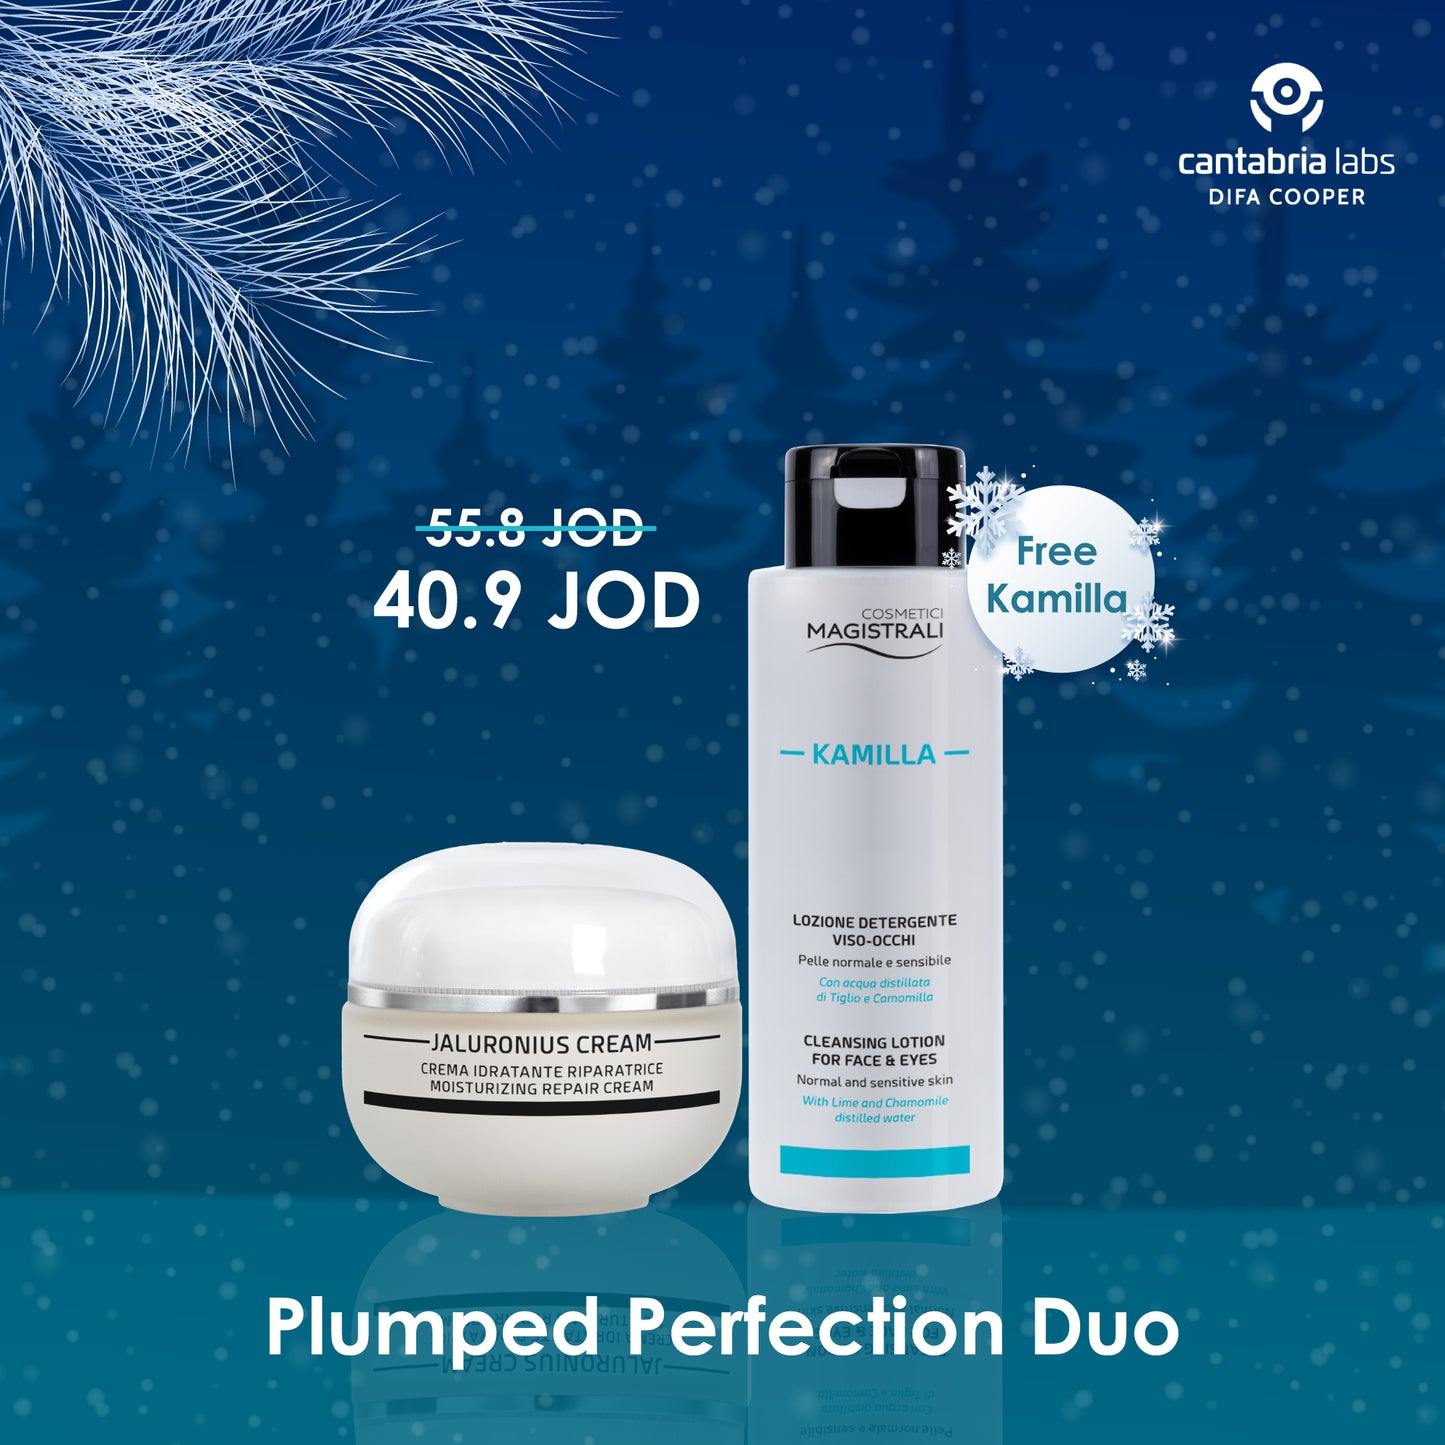 Plumped Perfection Duo